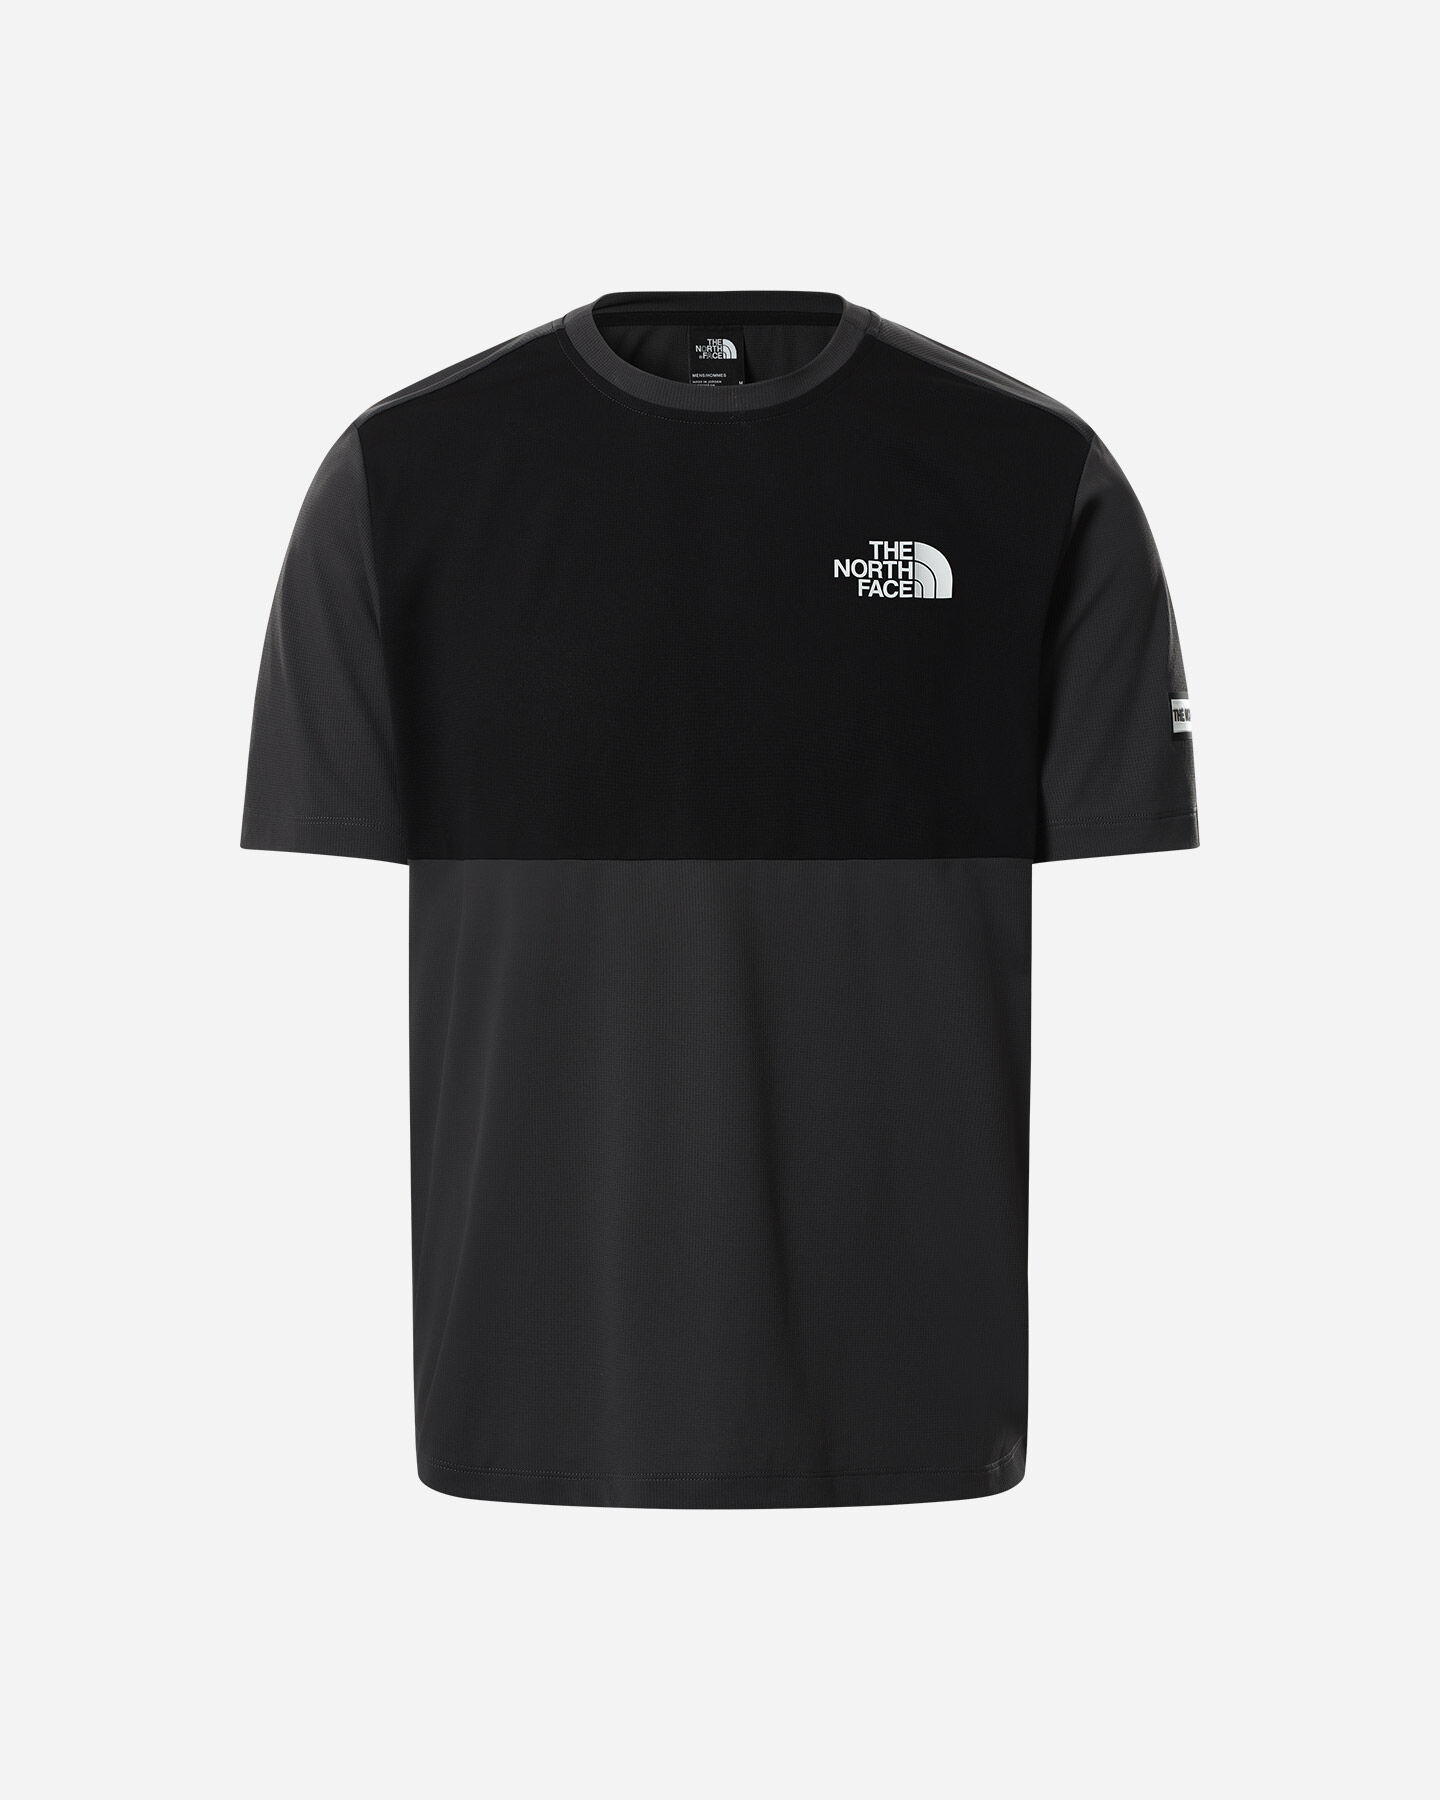  T-Shirt THE NORTH FACE HYBRID M S5348789|MN8|XS scatto 0